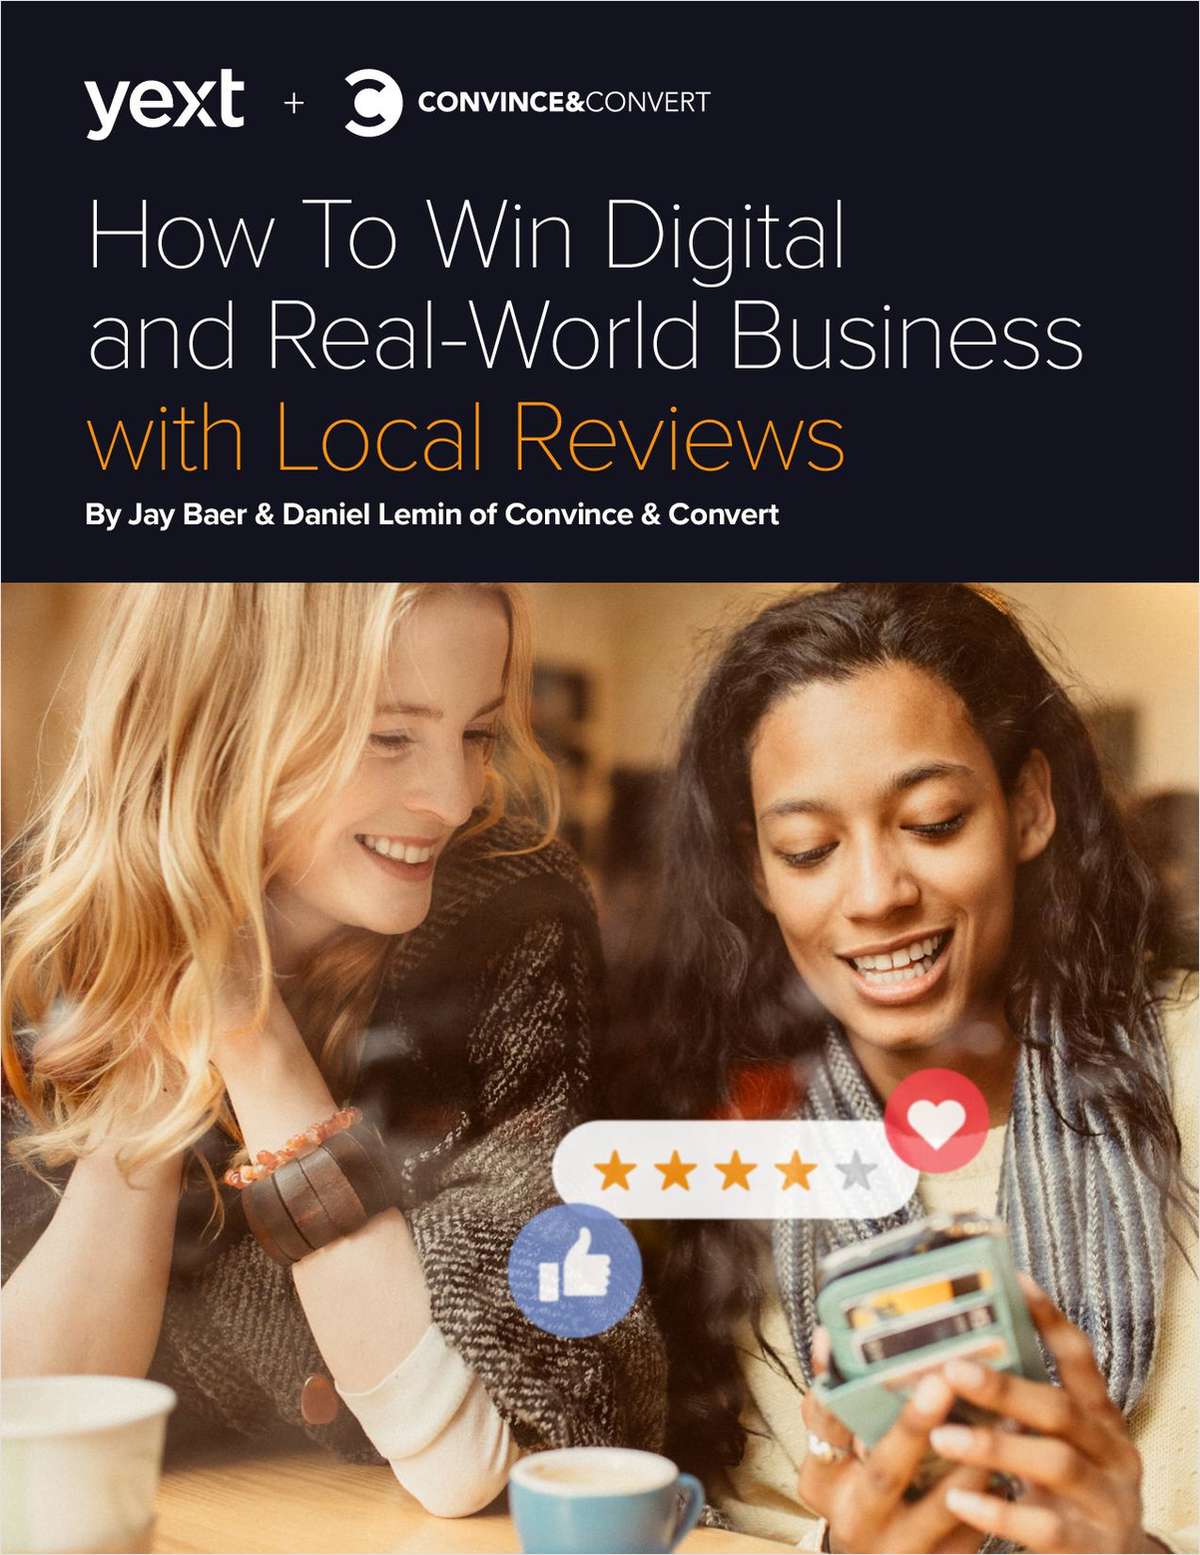 How To Win Digital & Real-World Traffic with Local Reviews